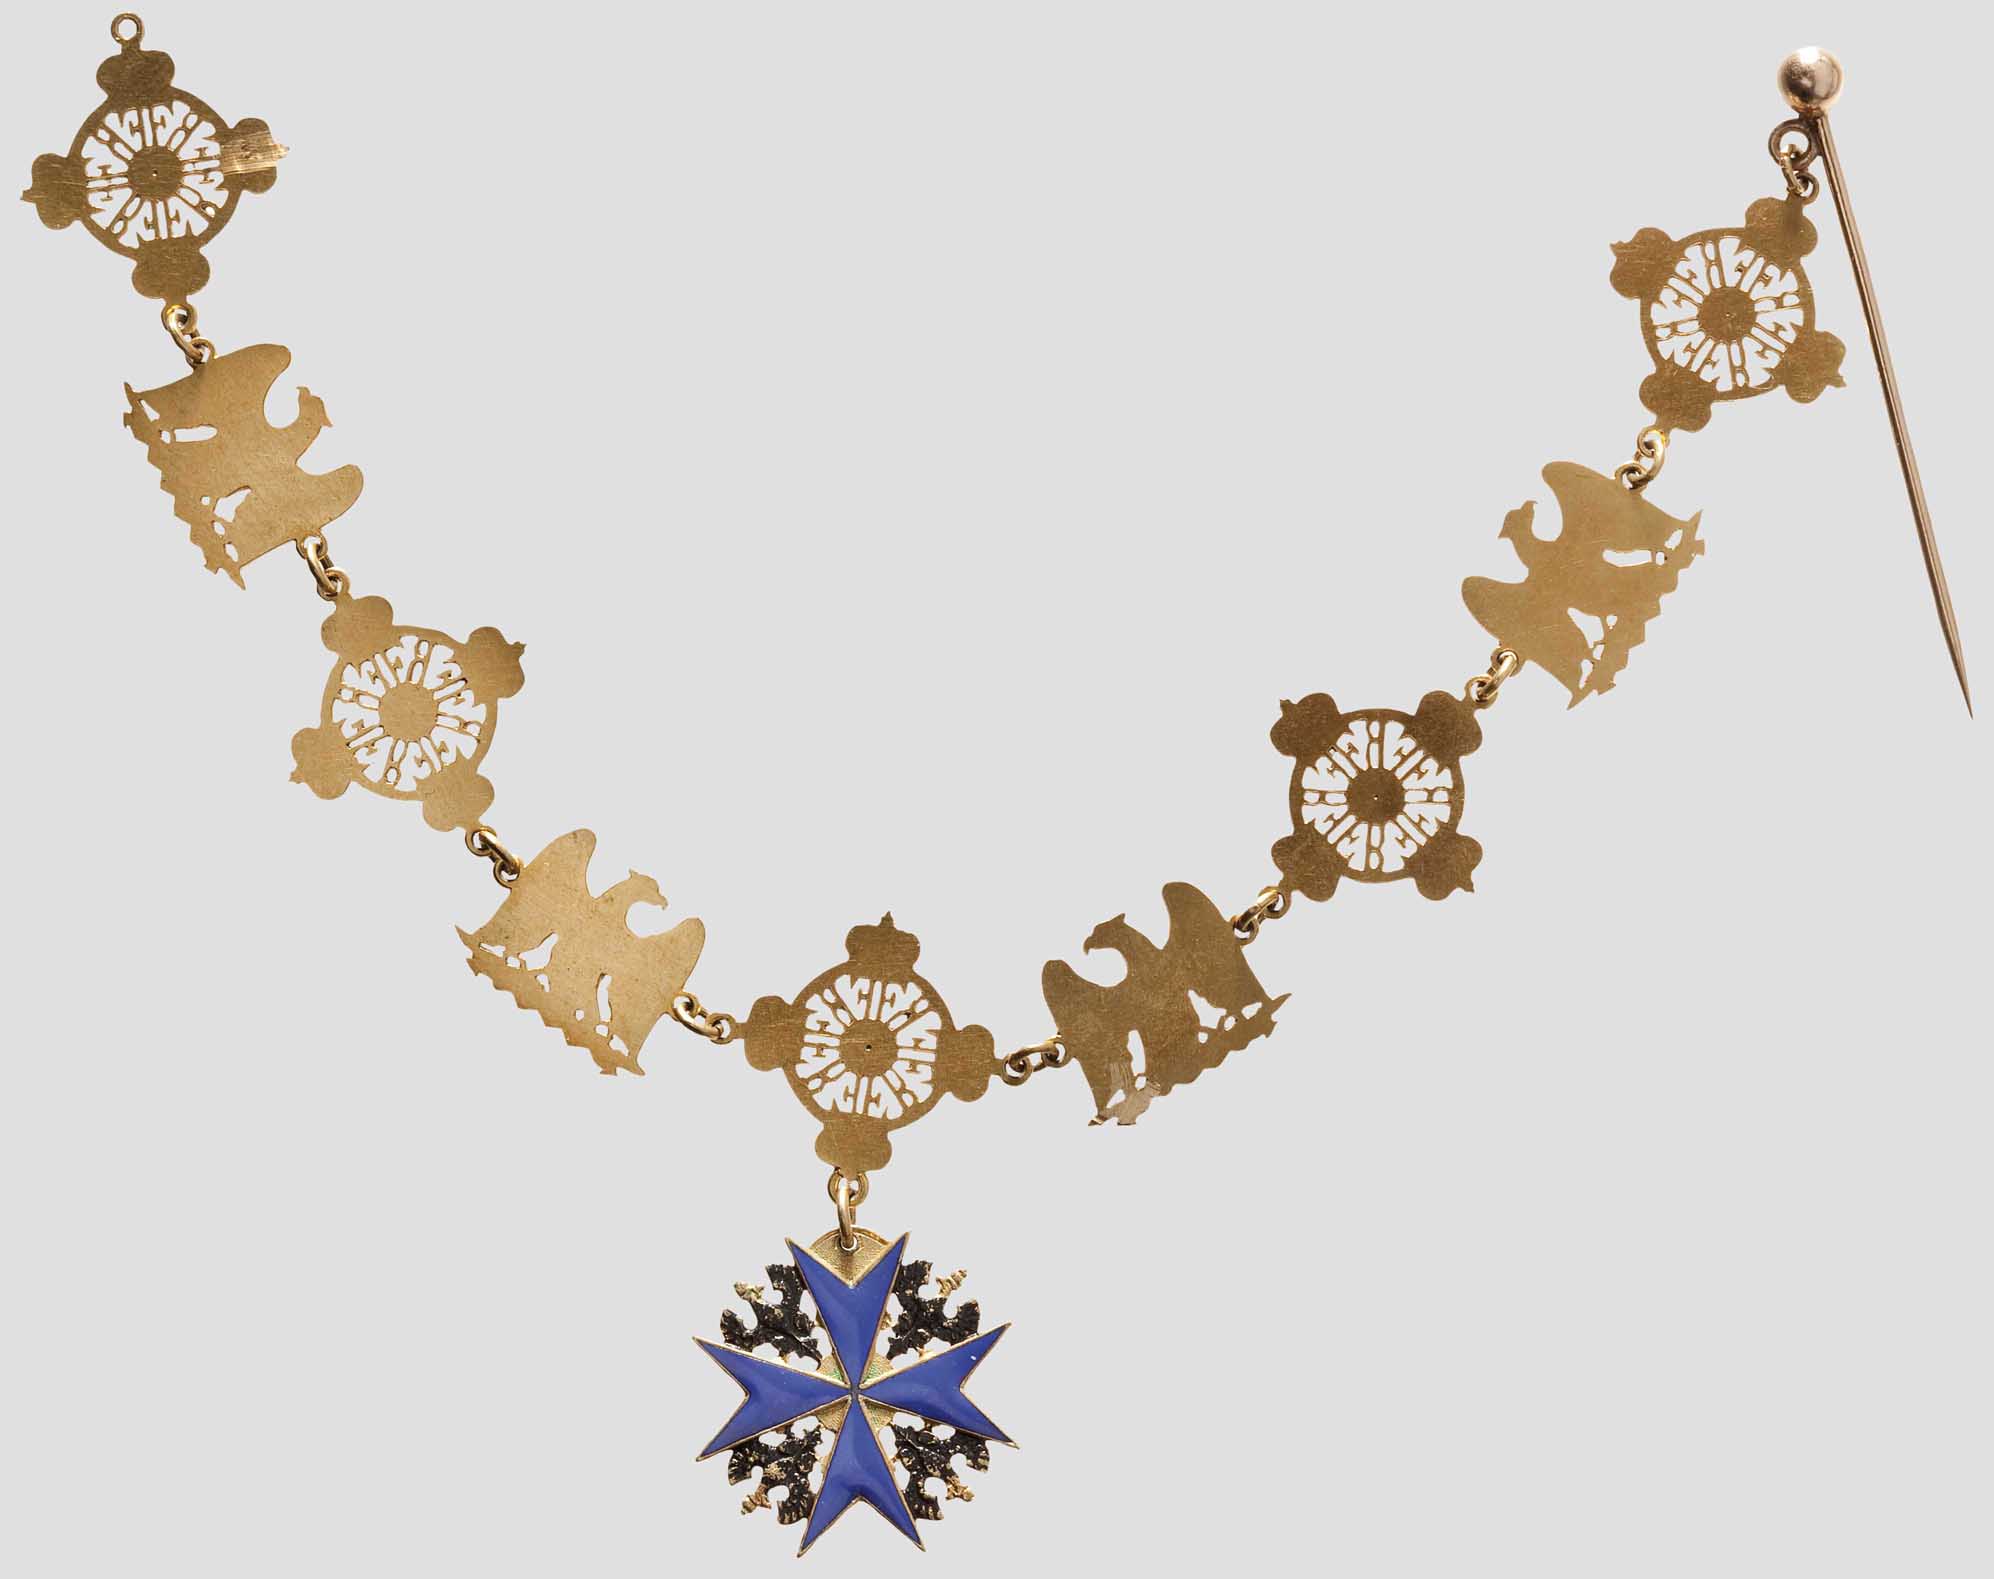 Miniature Chain of the Prussian  Order of the Black Eagle.jpg